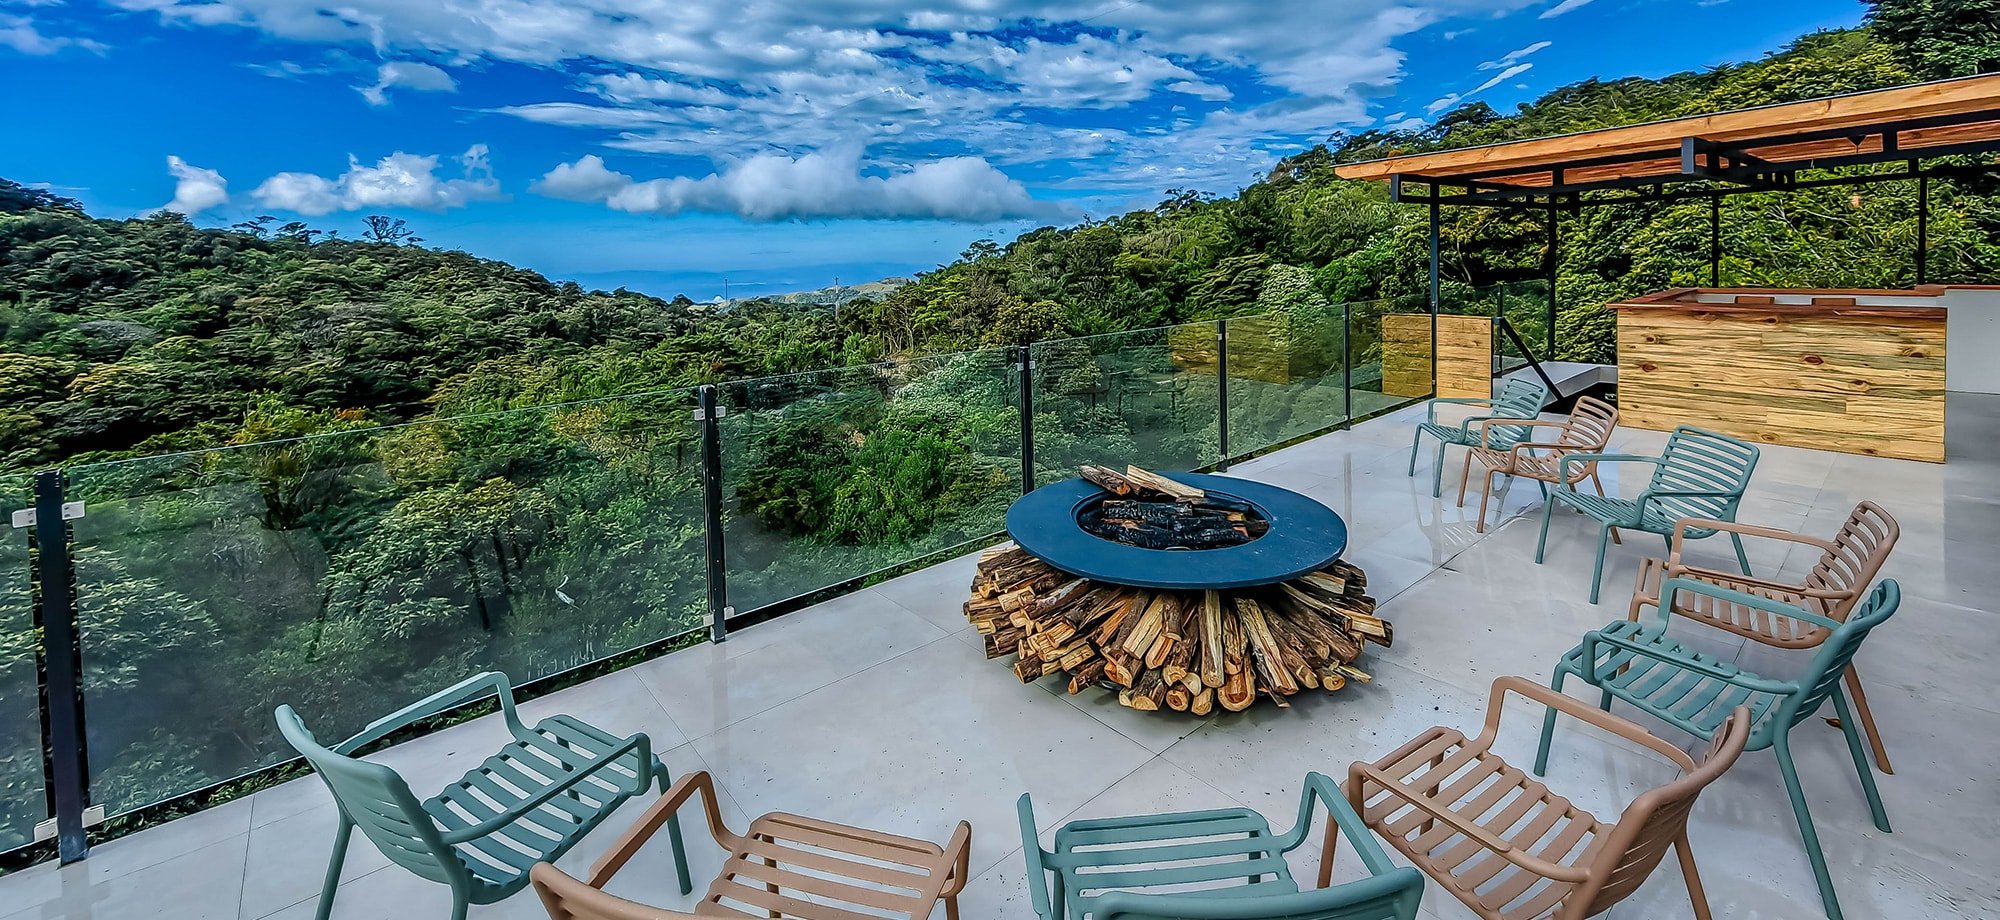 cloud_forest_lodge_costa_rica_firepit-1